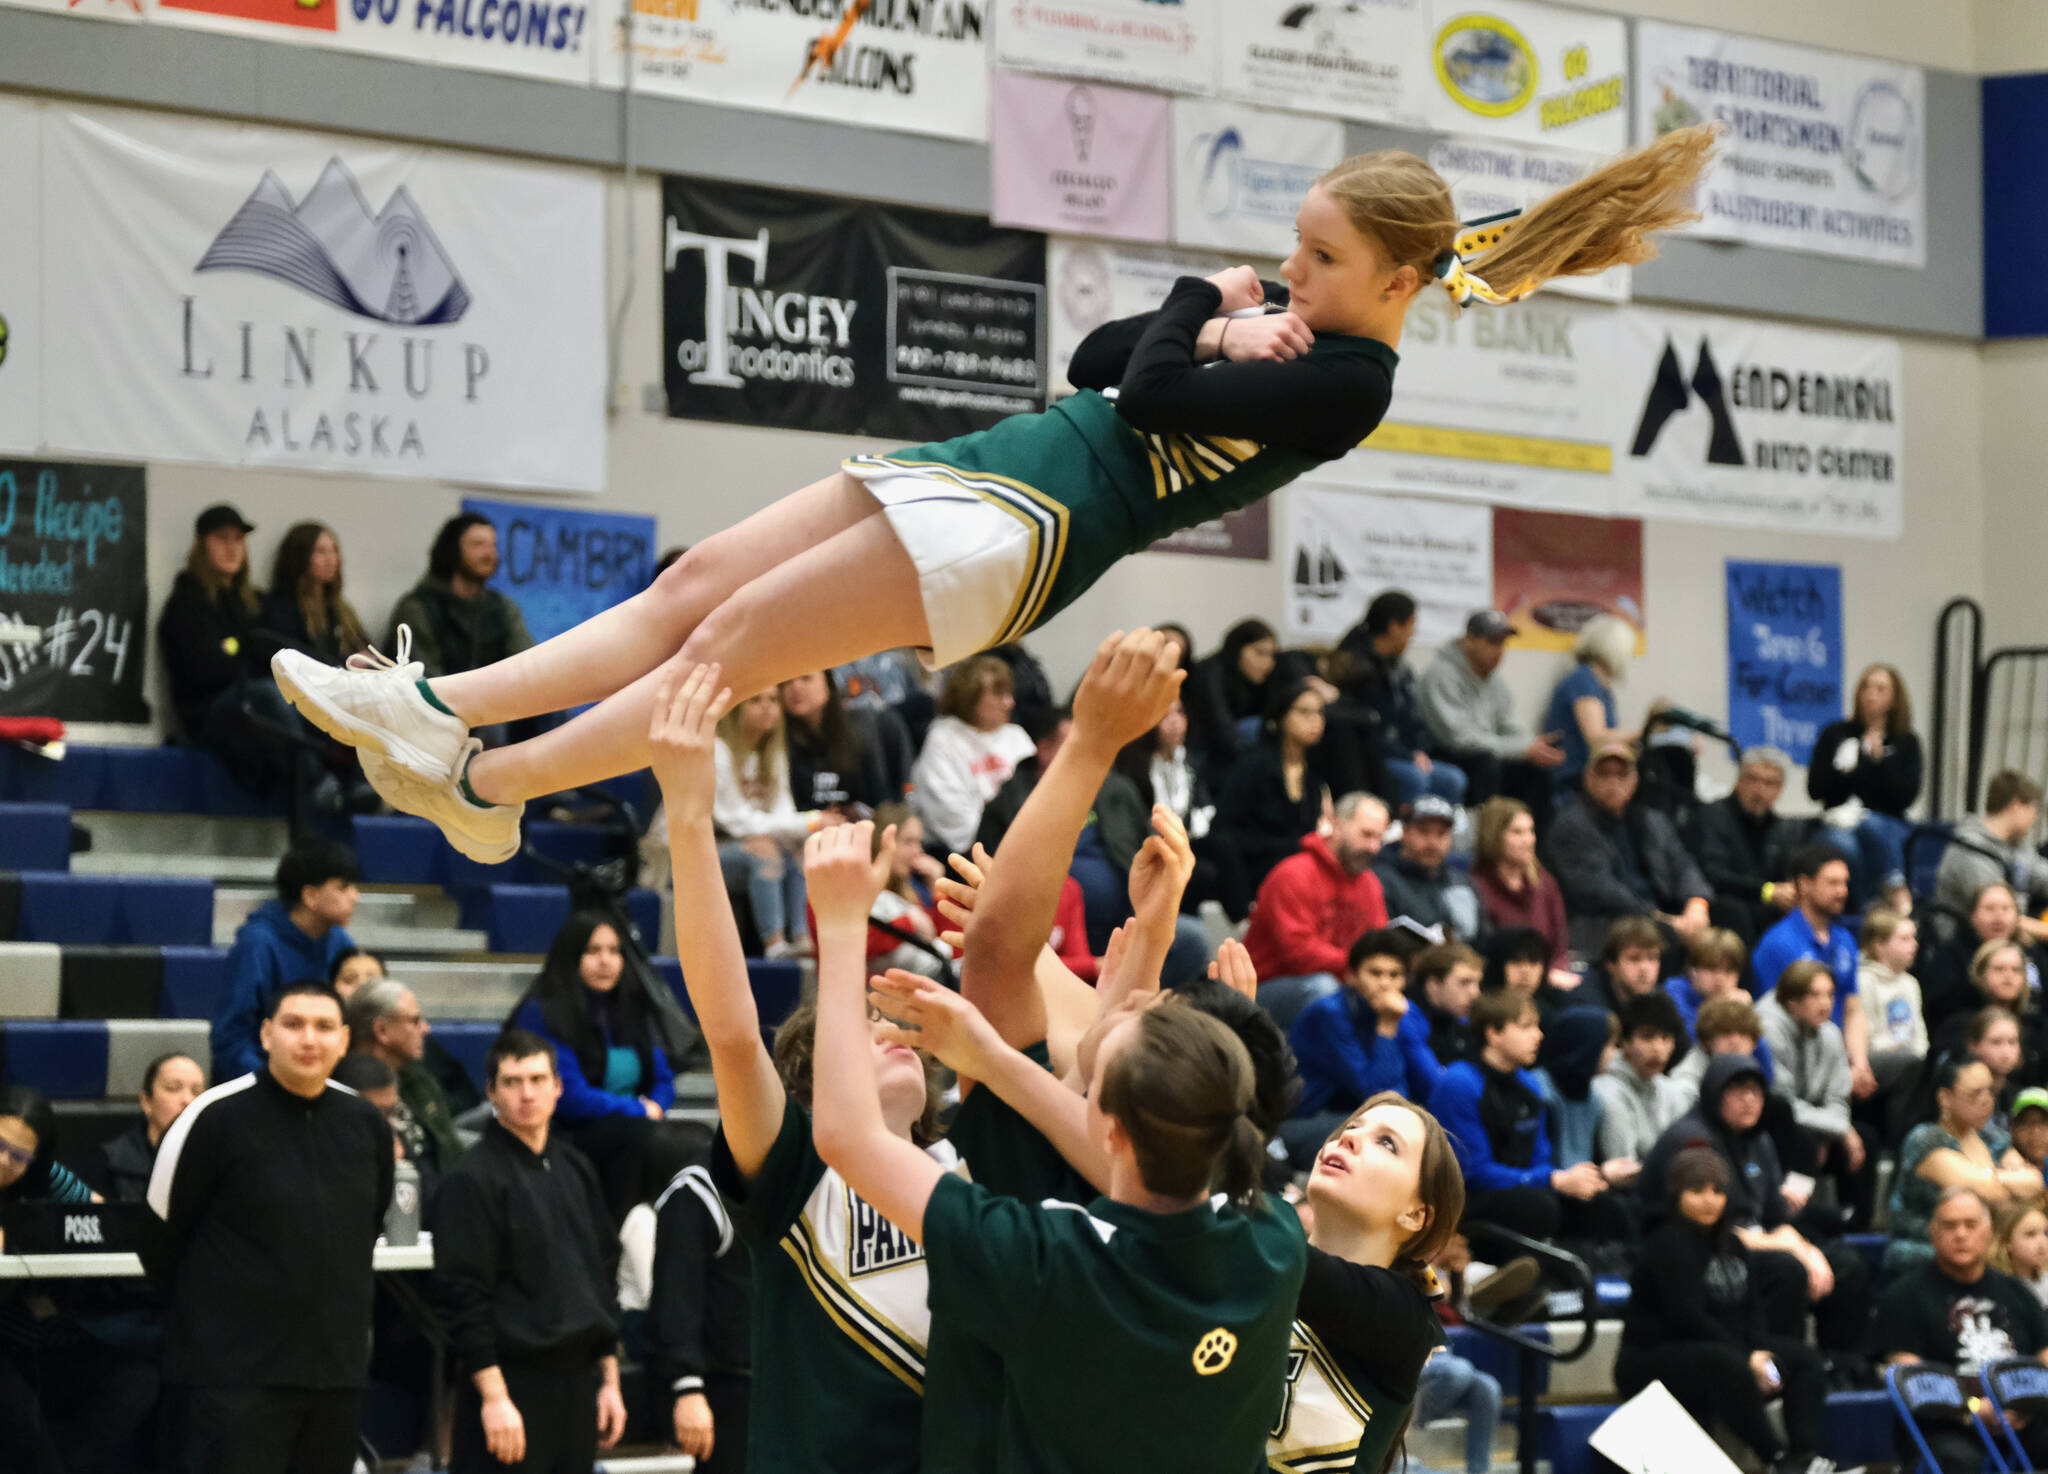 Craig cheerleaders perform during the Region V tournament on Wednesday. (Klas Stolpe / For the Juneau Empire)